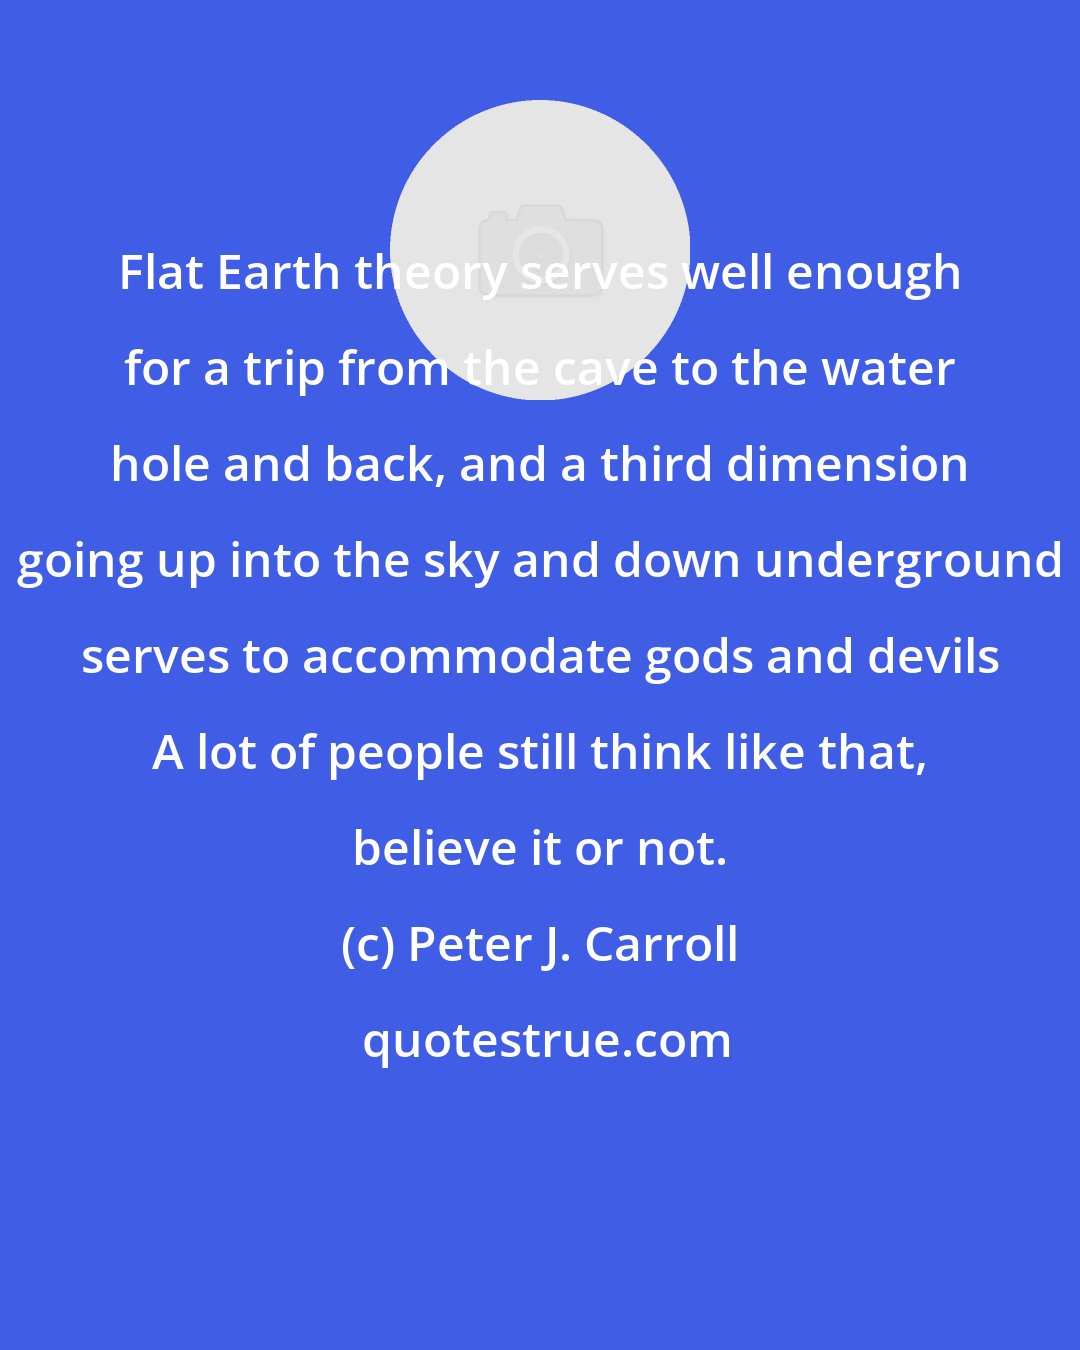 Peter J. Carroll: Flat Earth theory serves well enough for a trip from the cave to the water hole and back, and a third dimension going up into the sky and down underground serves to accommodate gods and devils A lot of people still think like that, believe it or not.